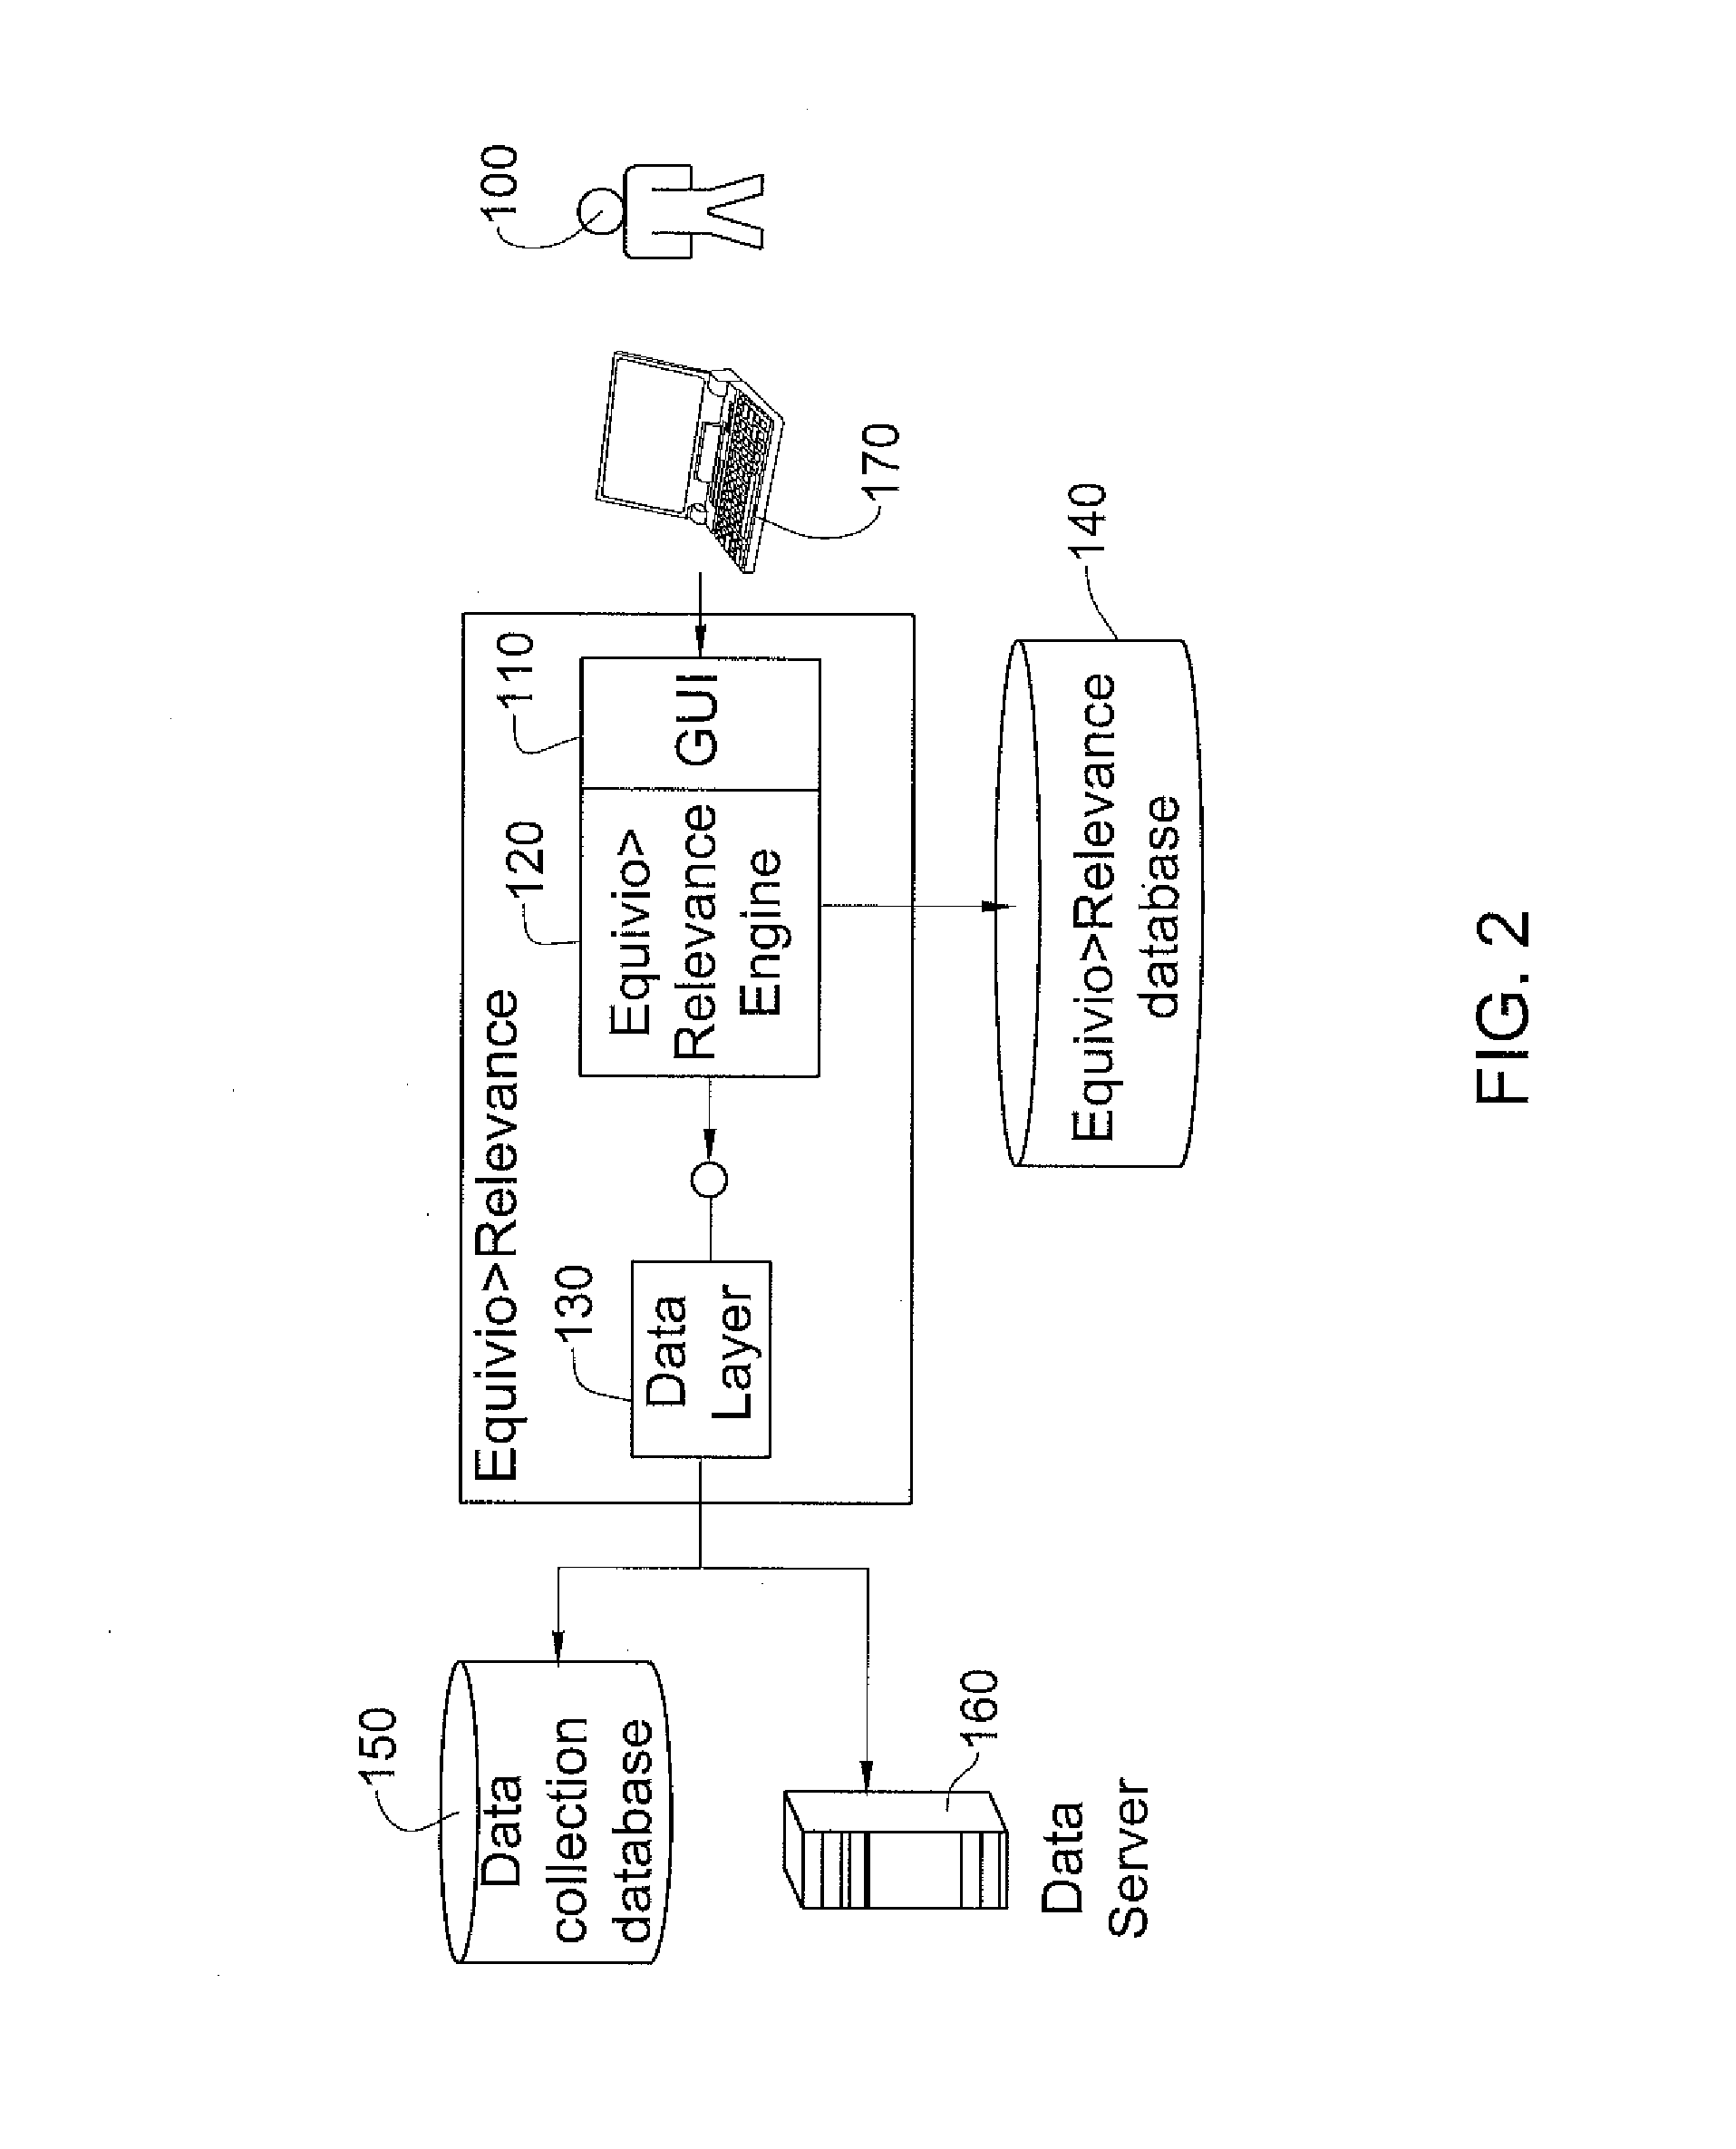 System for enhancing expert-based computerized analysis of a set of digital documents and methods useful in conjunction therewith